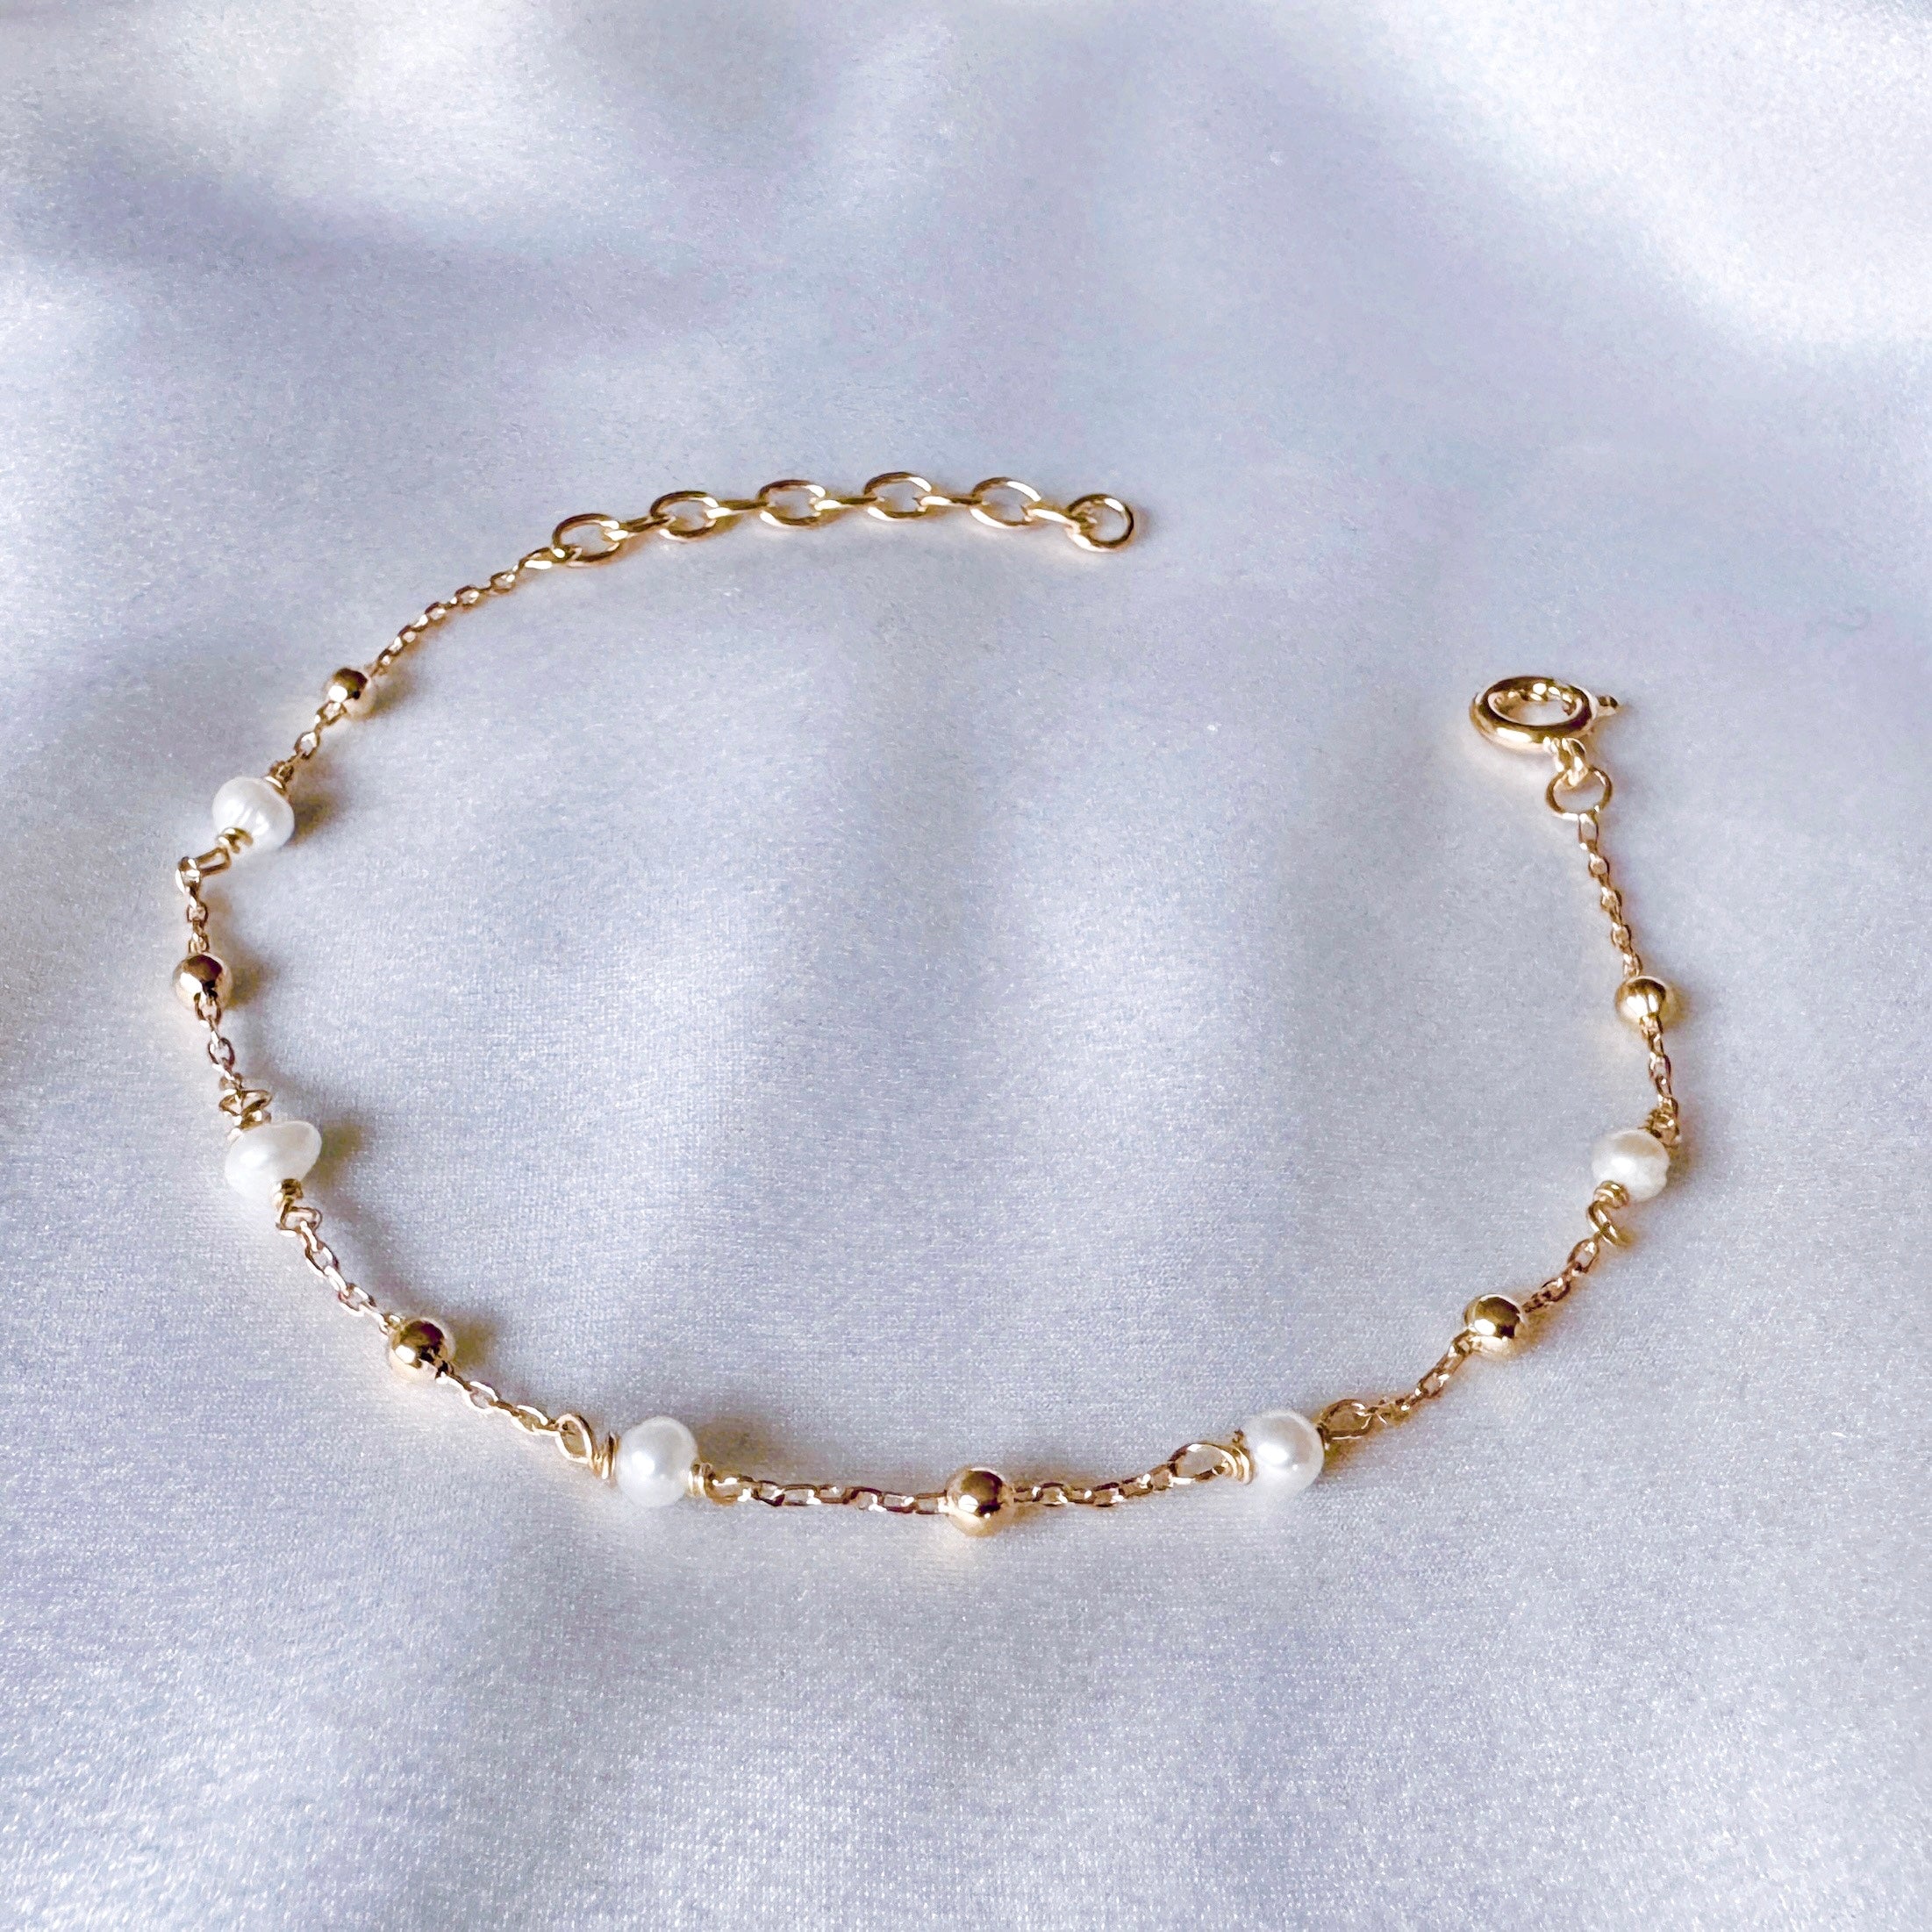 Gold-plated “Pearls” bracelet